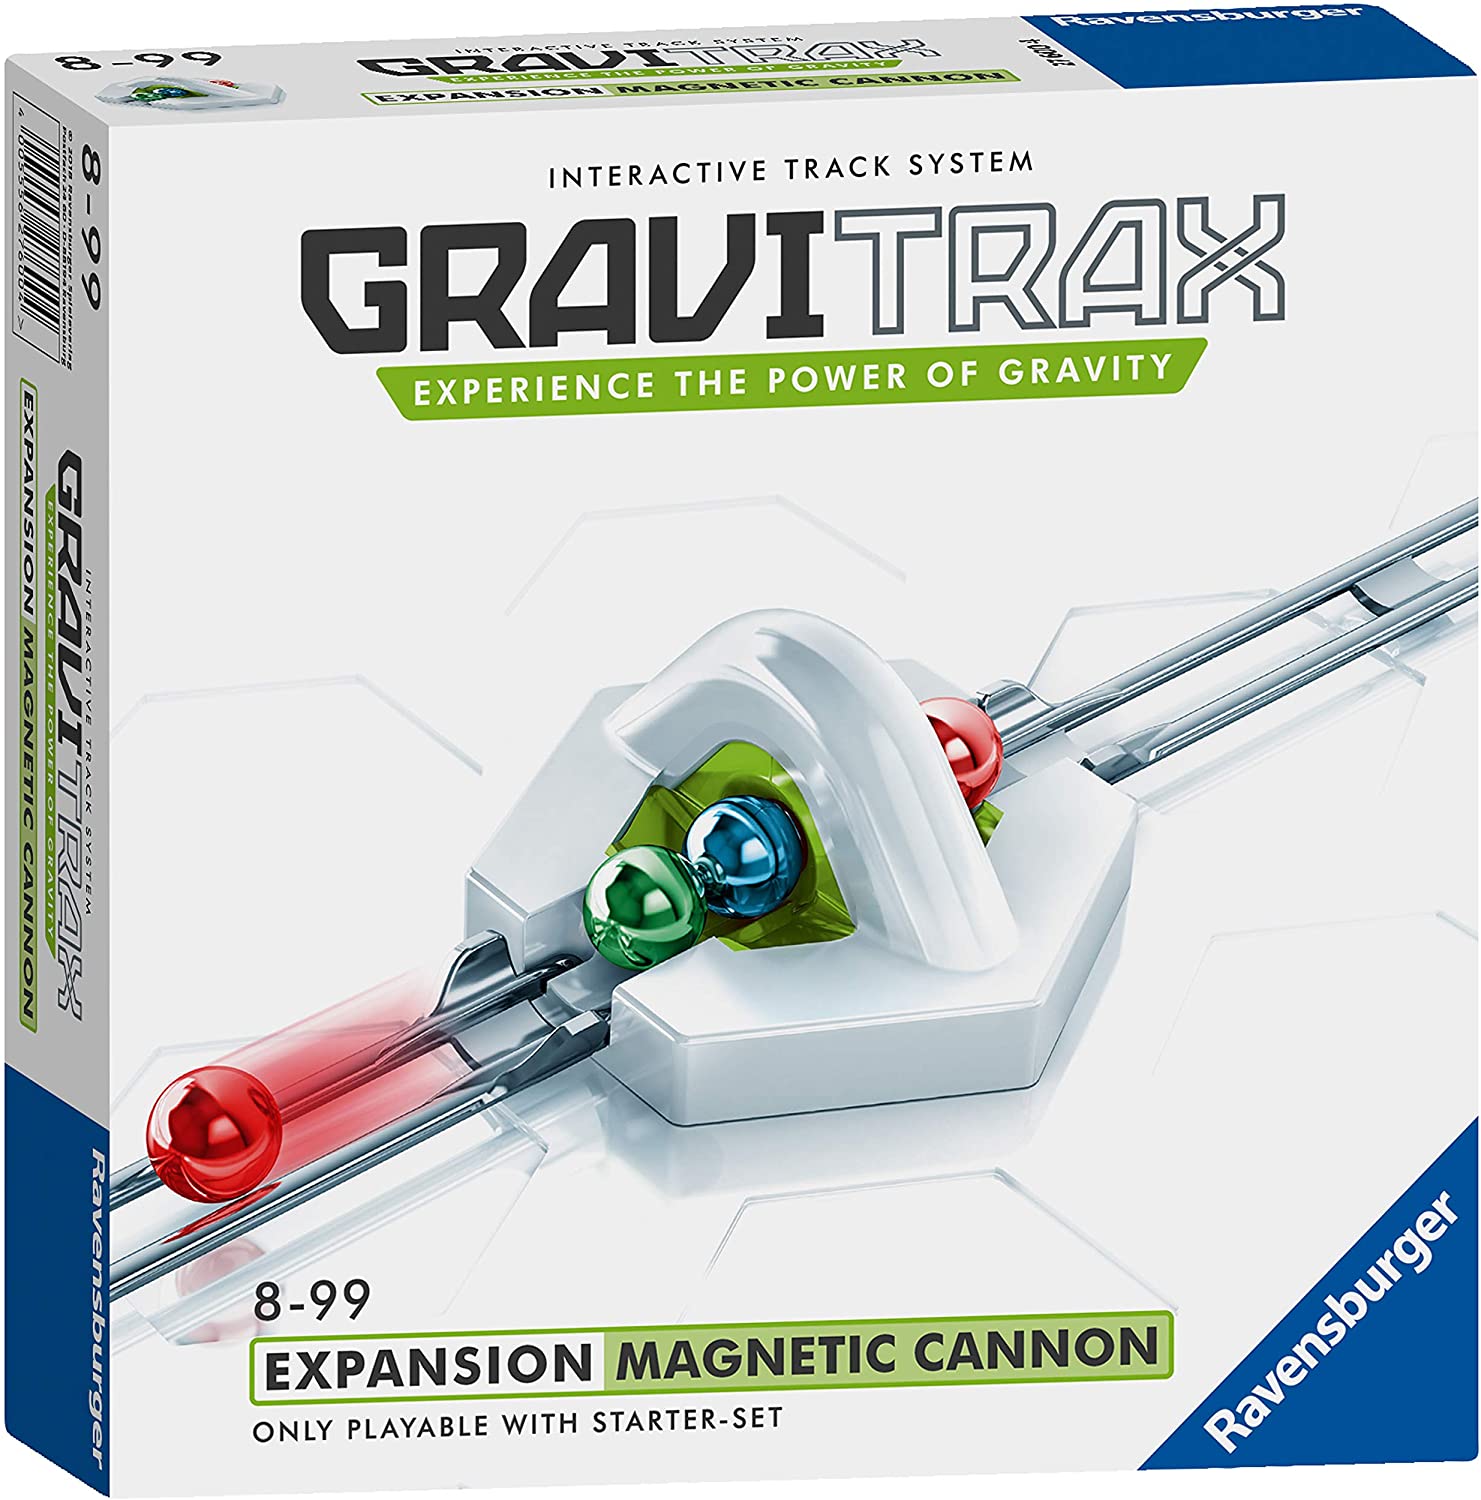 GraviTrax - Magnetic Cannon expansion